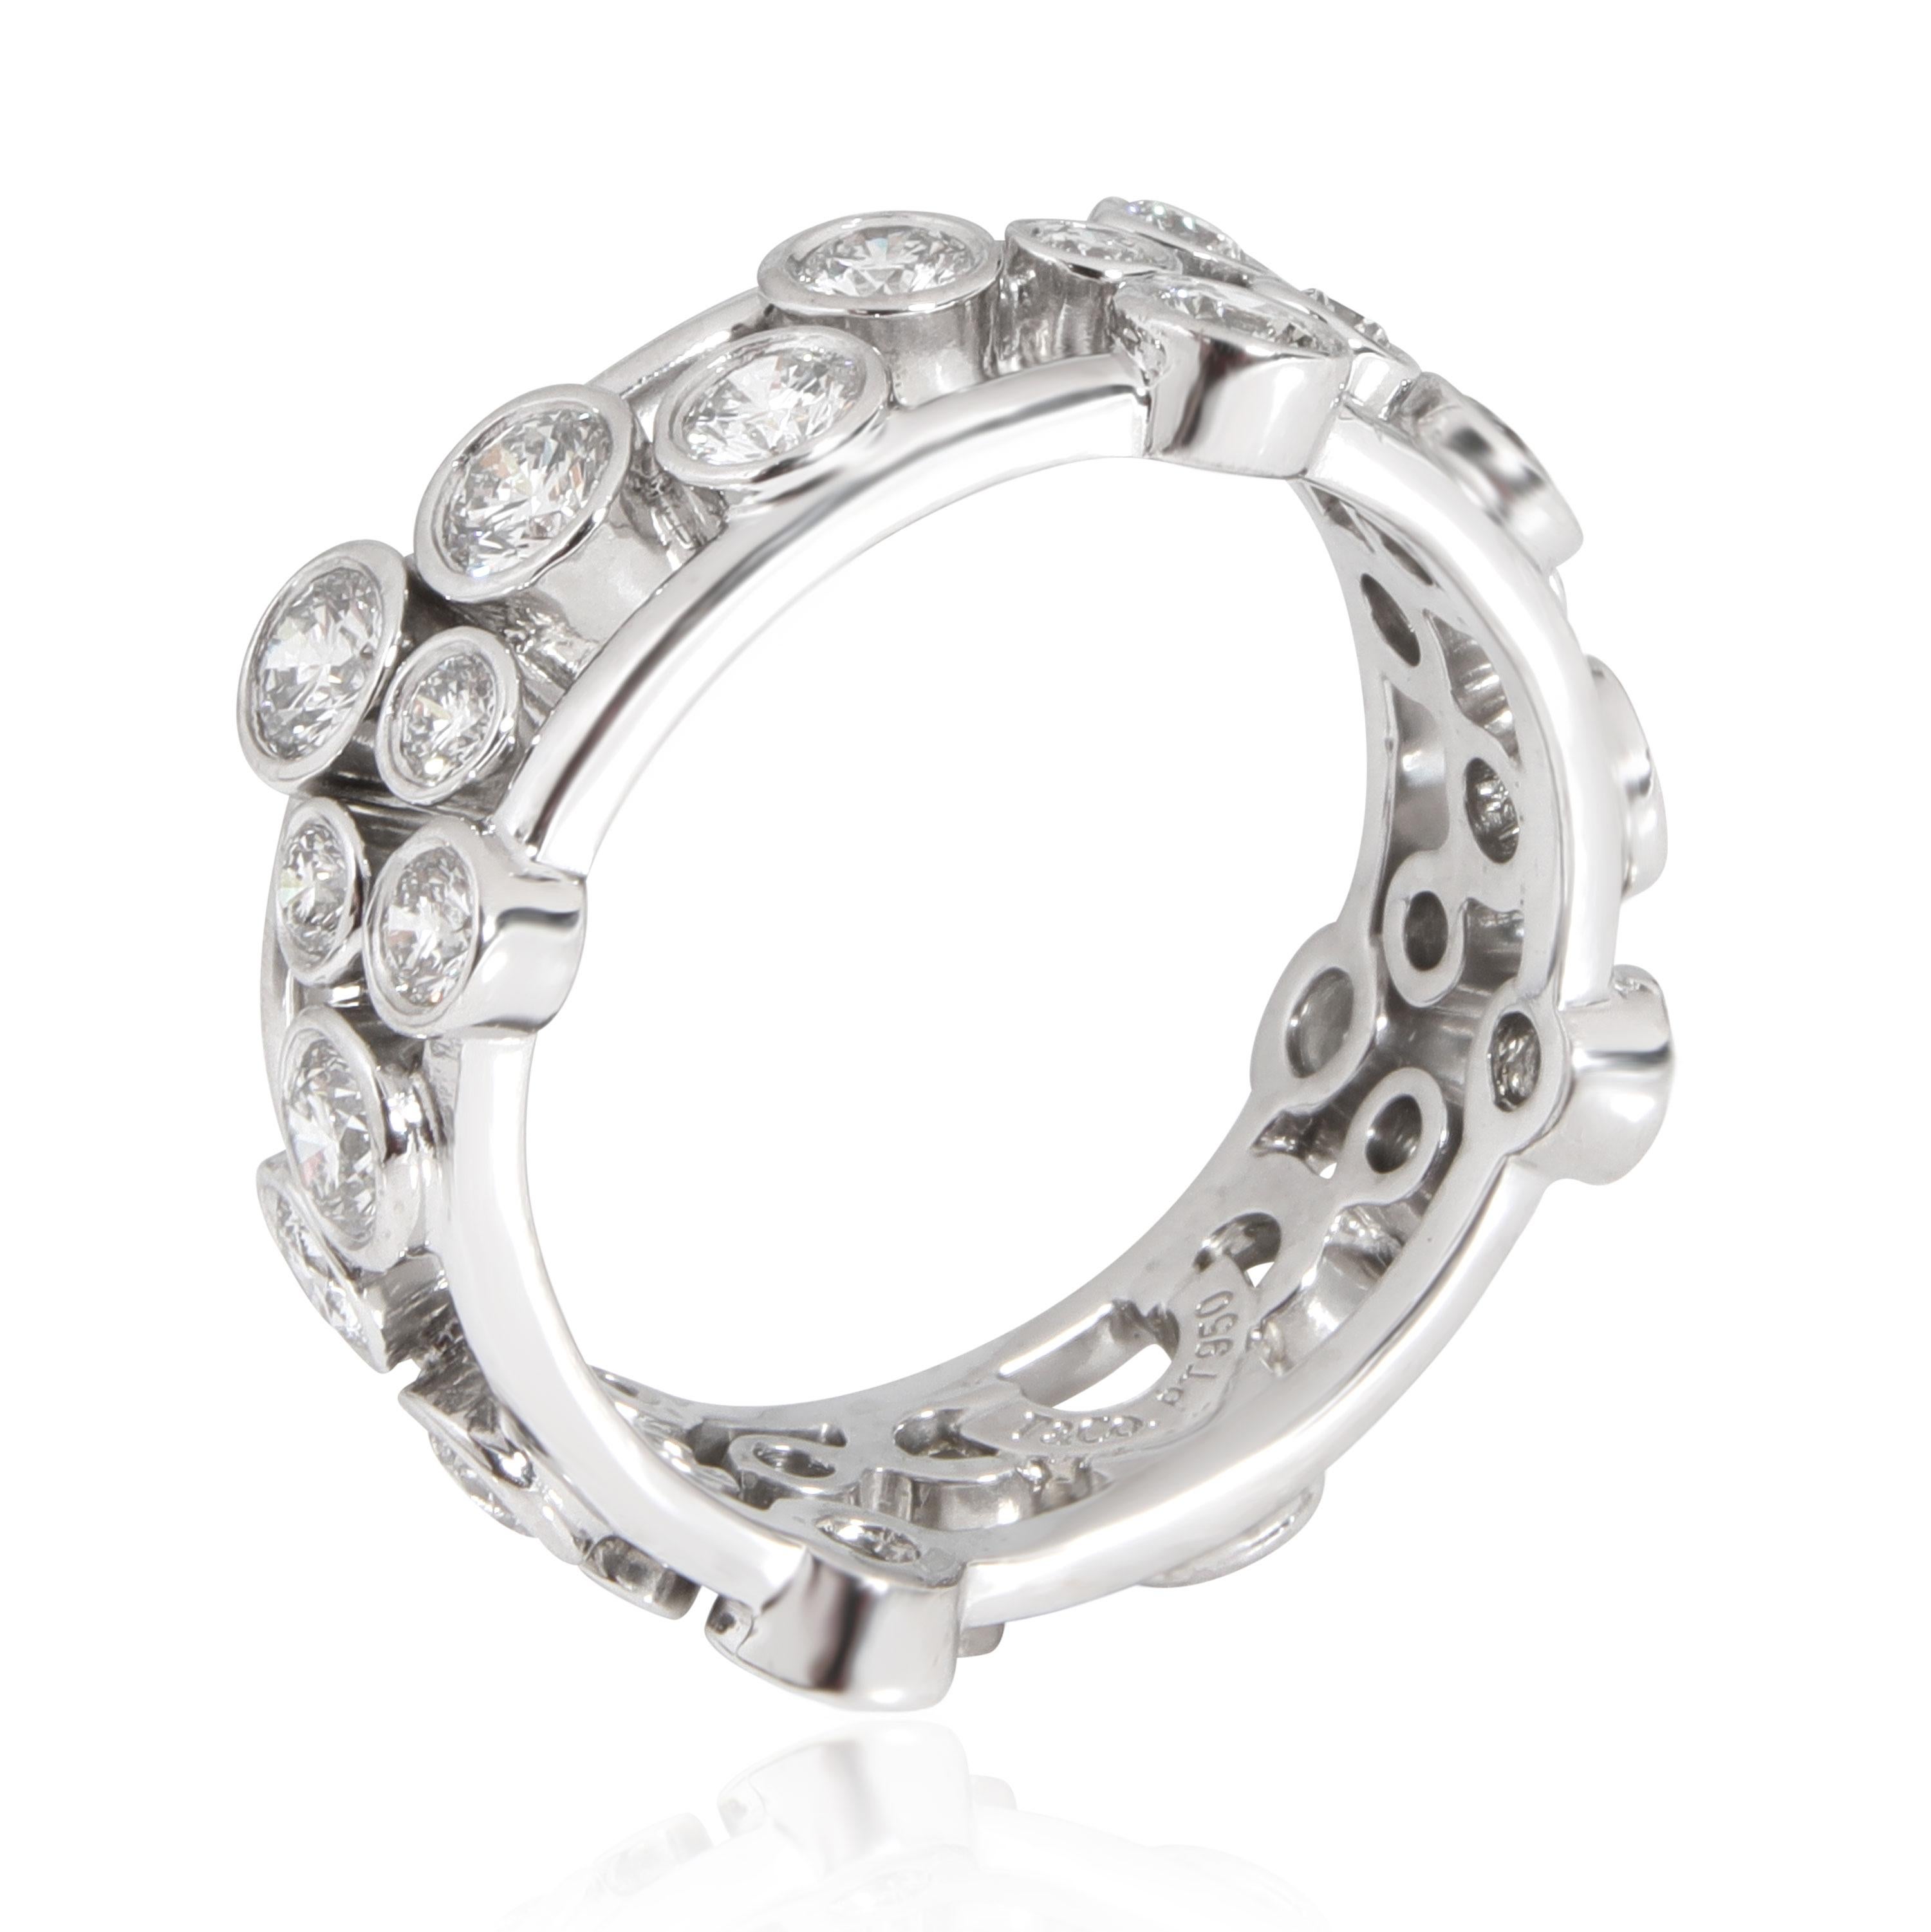 Tiffany & Co. Bubbles Diamond Ring in Platinum 1.60 CTW

PRIMARY DETAILS
SKU: 111201
Listing Title: Tiffany & Co. Bubbles Diamond Ring in Platinum 1.60 CTW
Condition Description: Retails for 10,700 USD. In excellent condition and recently polished.